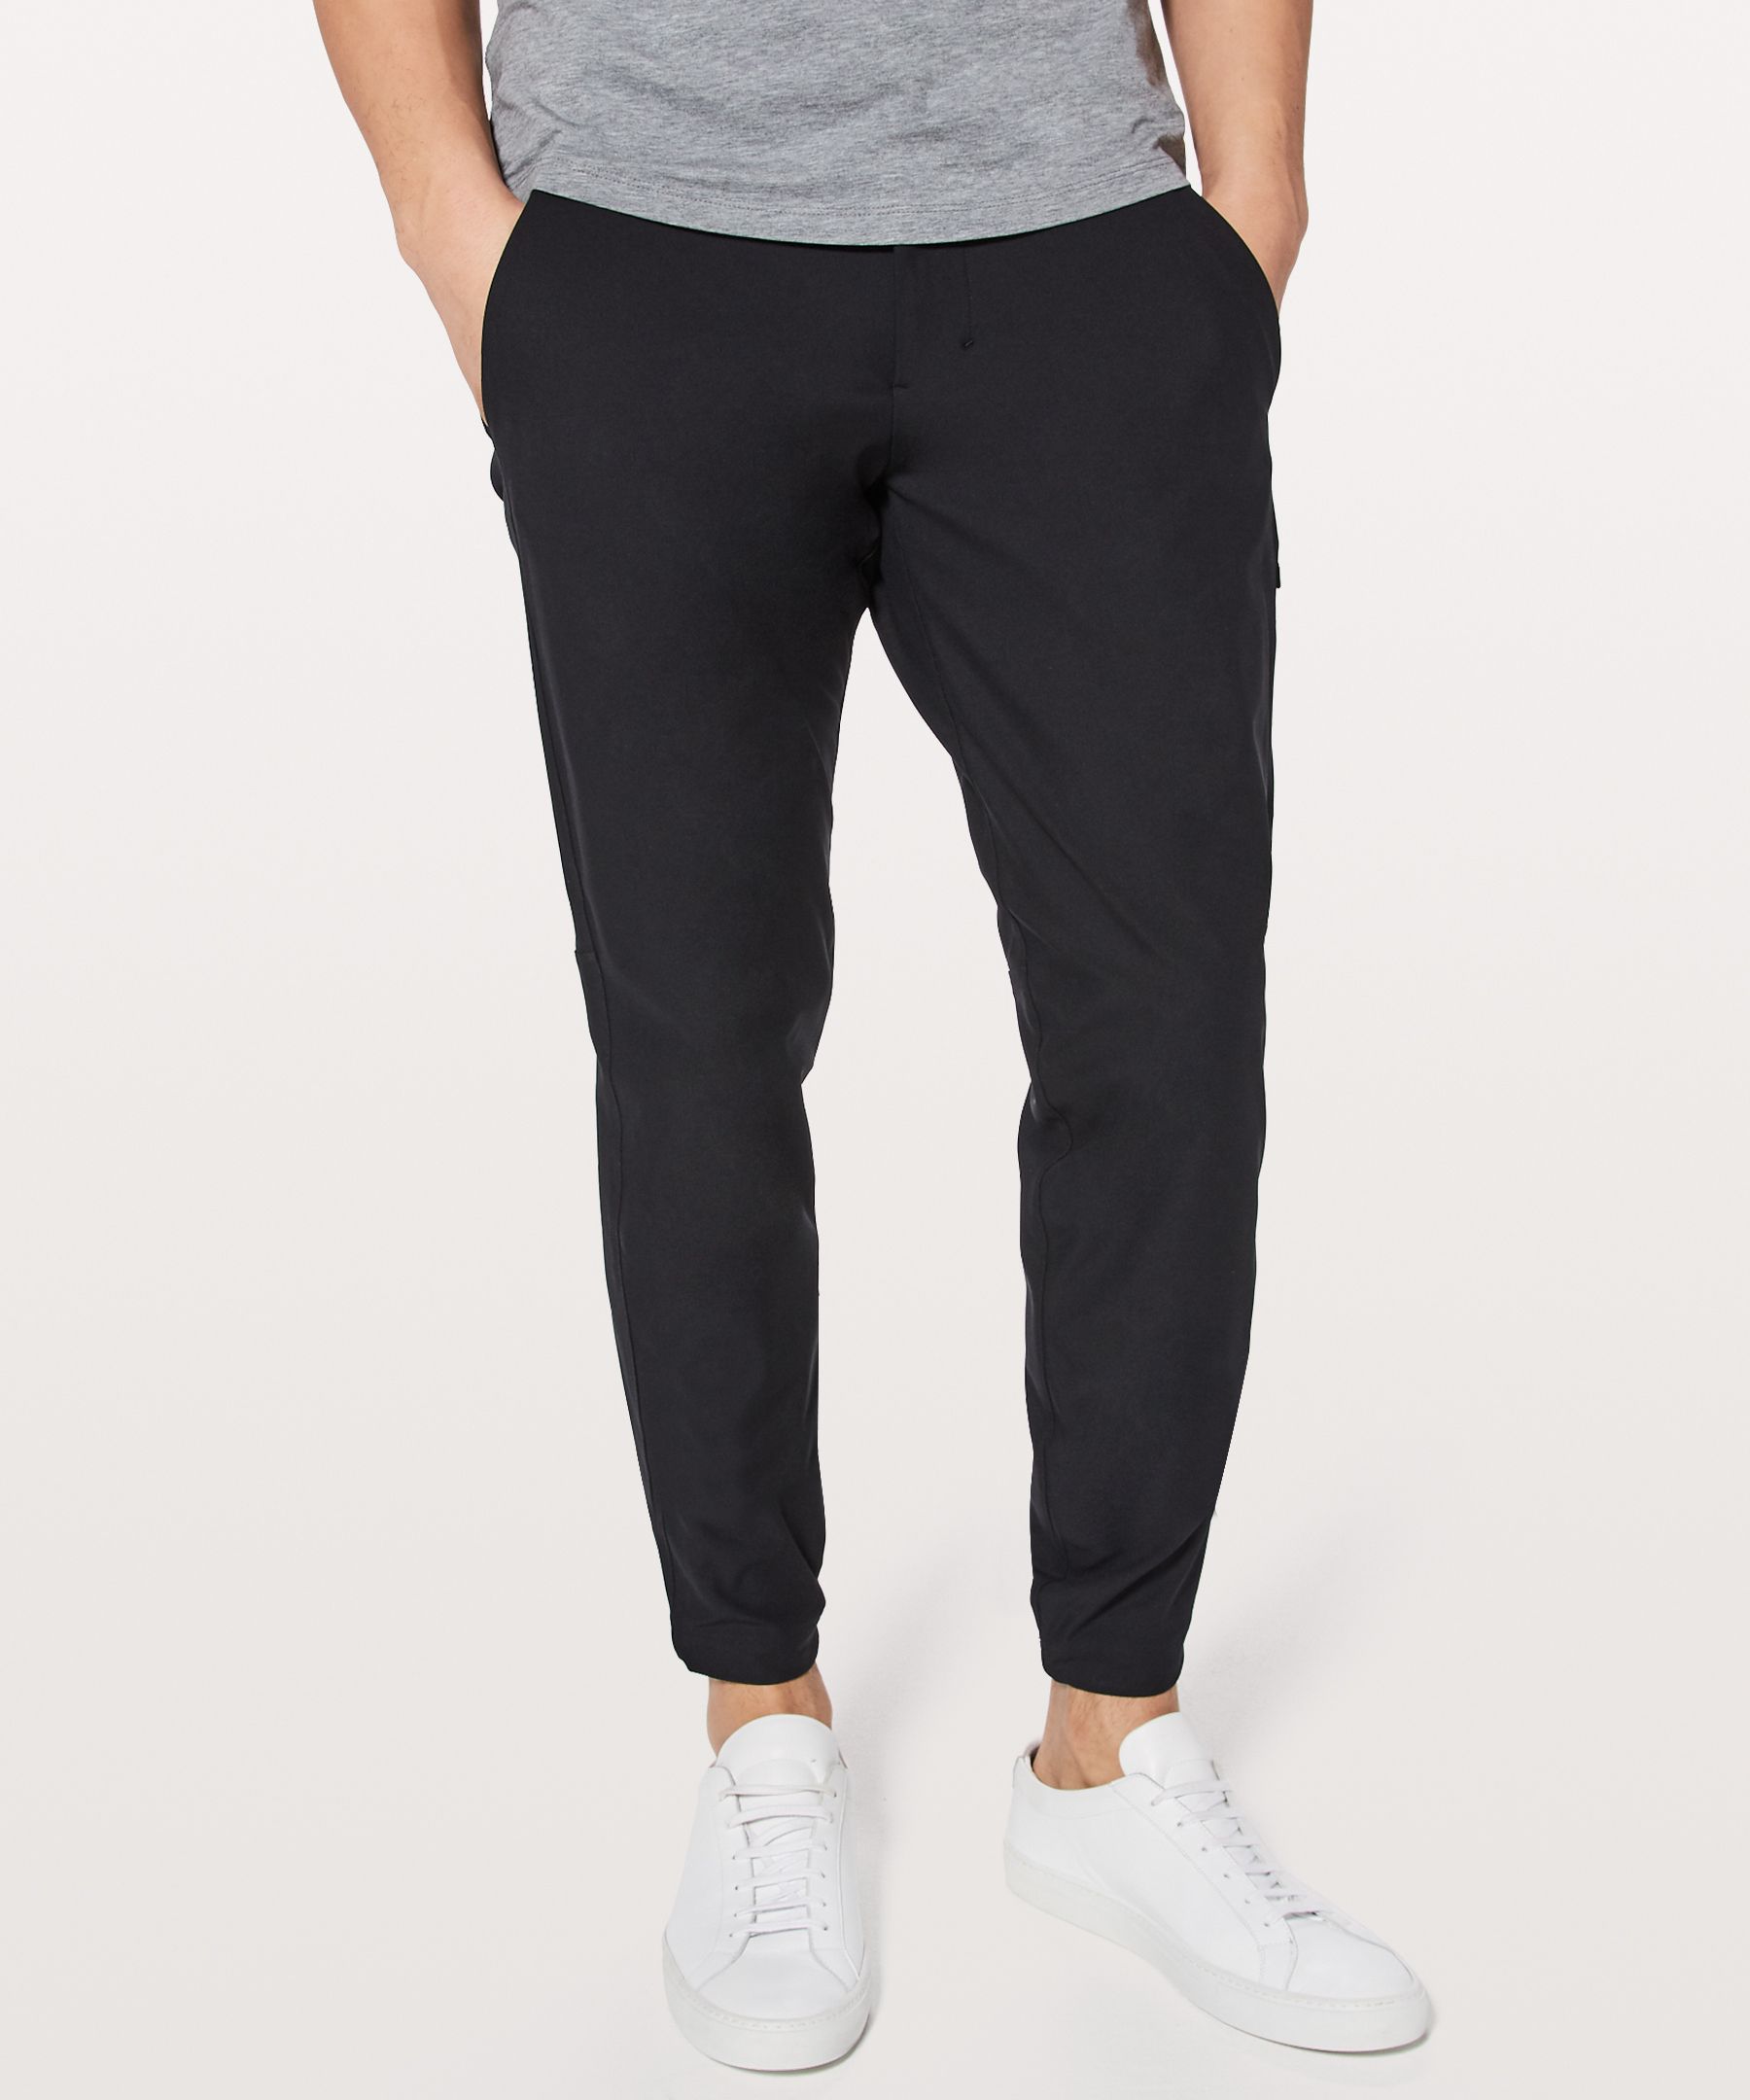 All Town Commute Pant